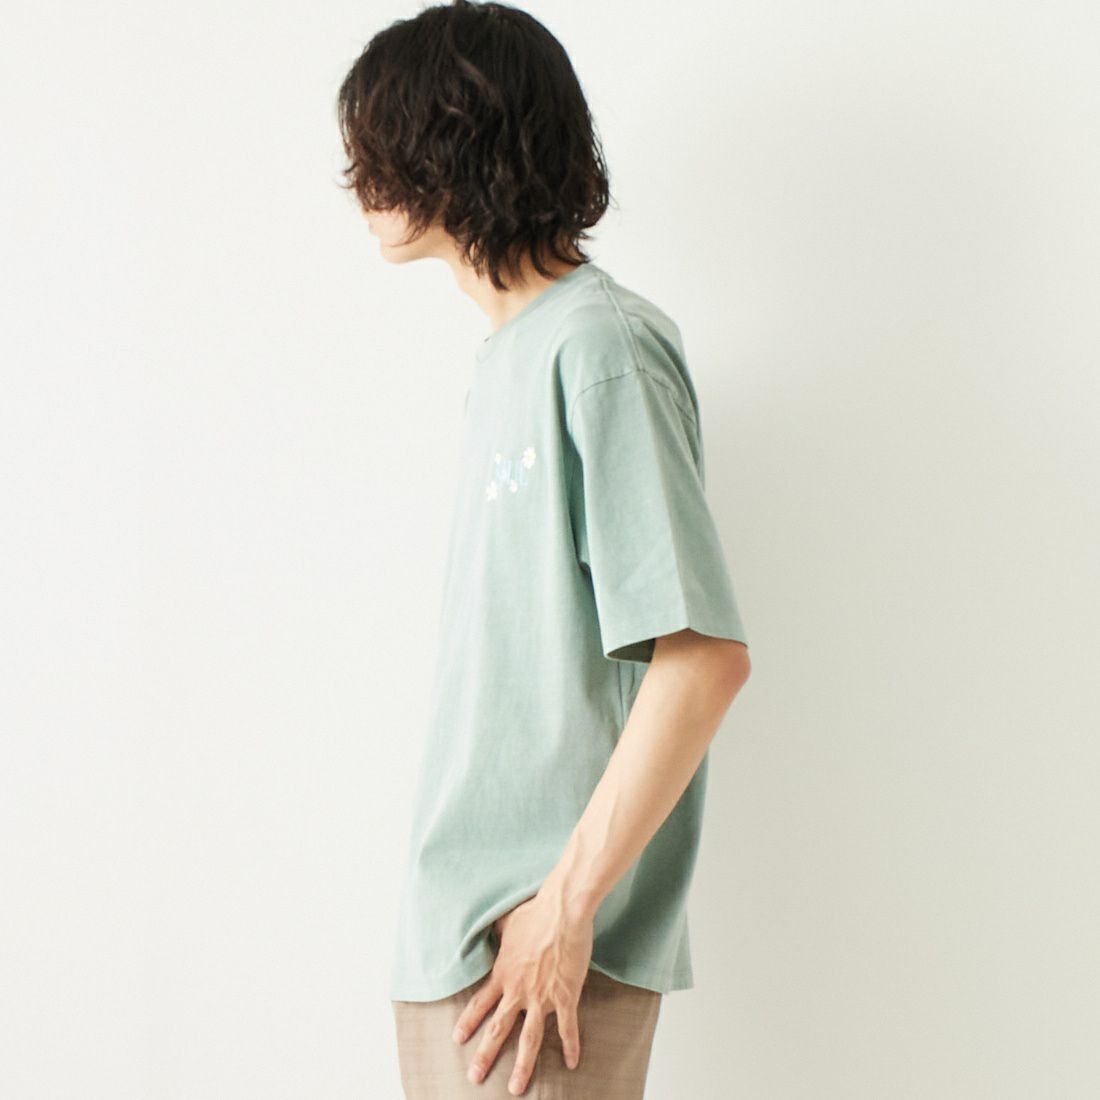 Jeans Factory Clothes [ジーンズファクトリークローズ] DISCOプリントTシャツ [2322-420IN-A] MINT &&モデル身長：182cm 着用サイズ：L&&